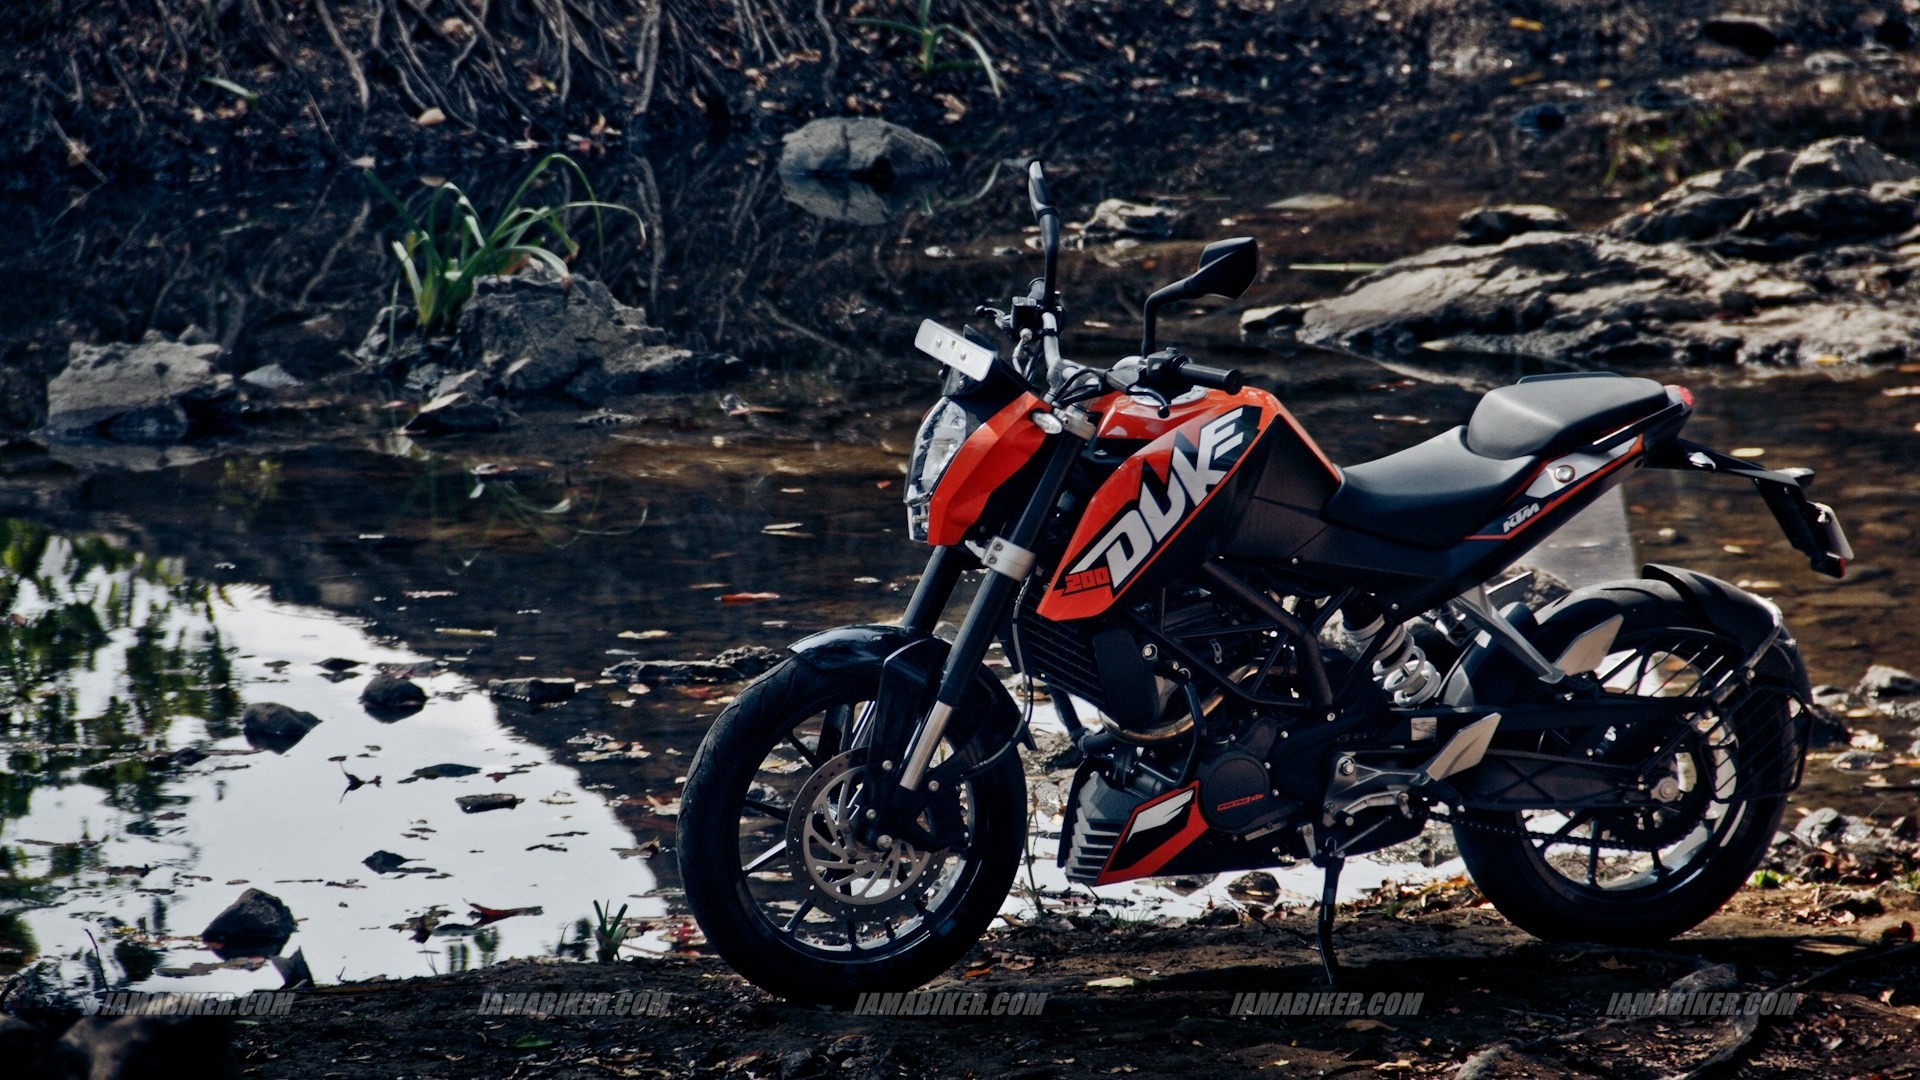 1920x1080 KTM Duke 200 HD wallpaper gallery. Click on picture to see high resolution  image.